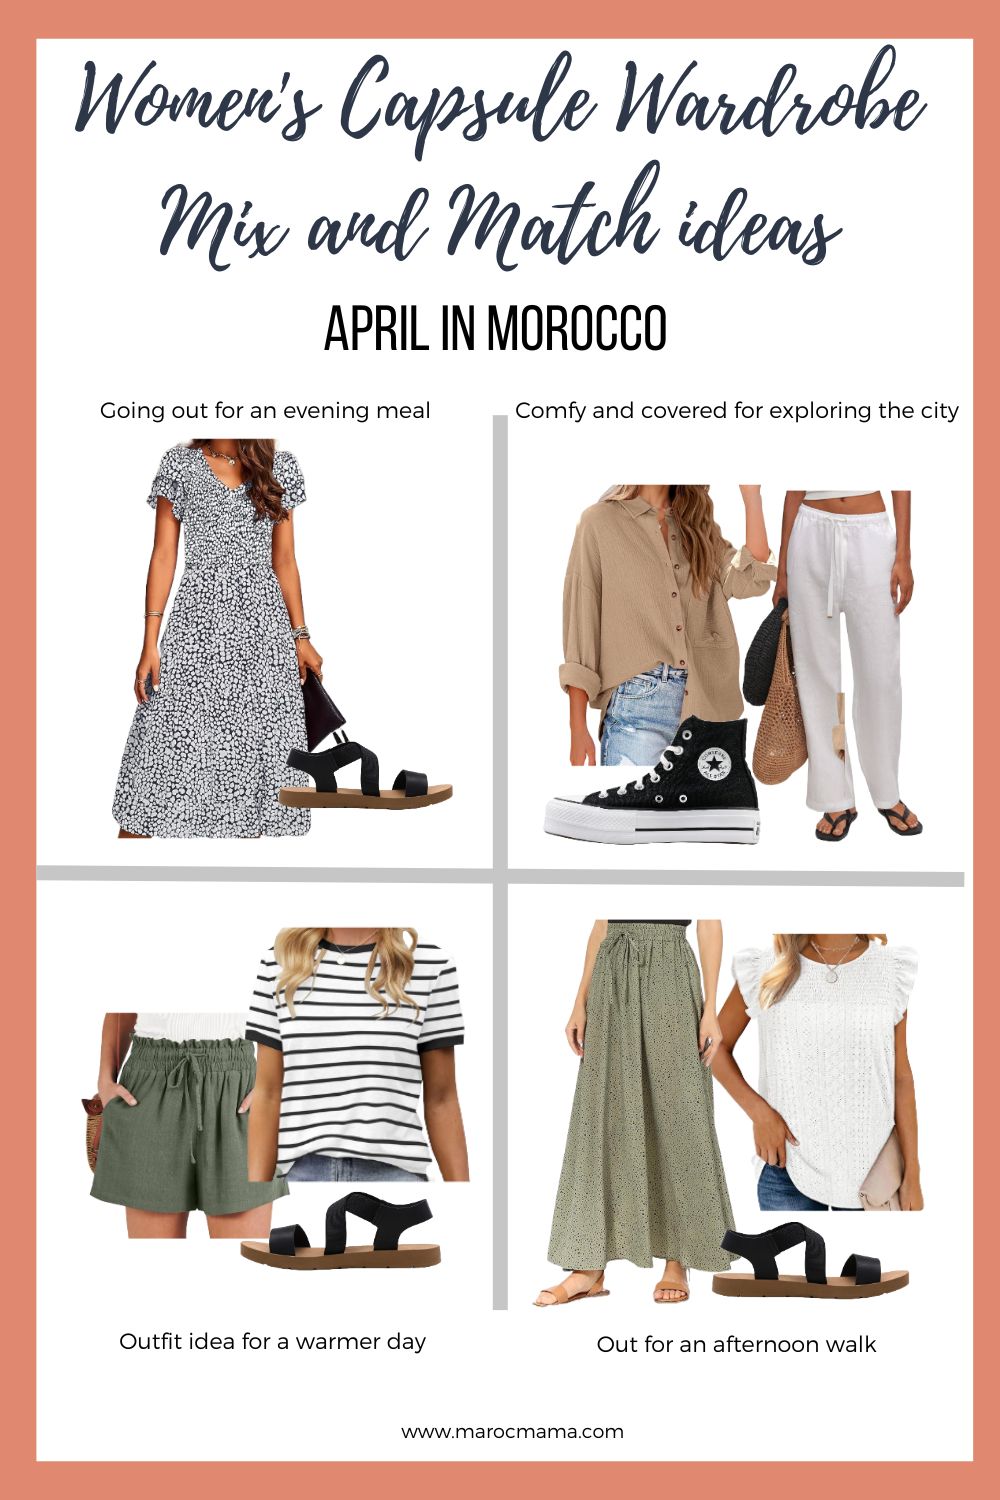 Women's Capsule Wardrobe Mix and Match ideas, April in Morocco